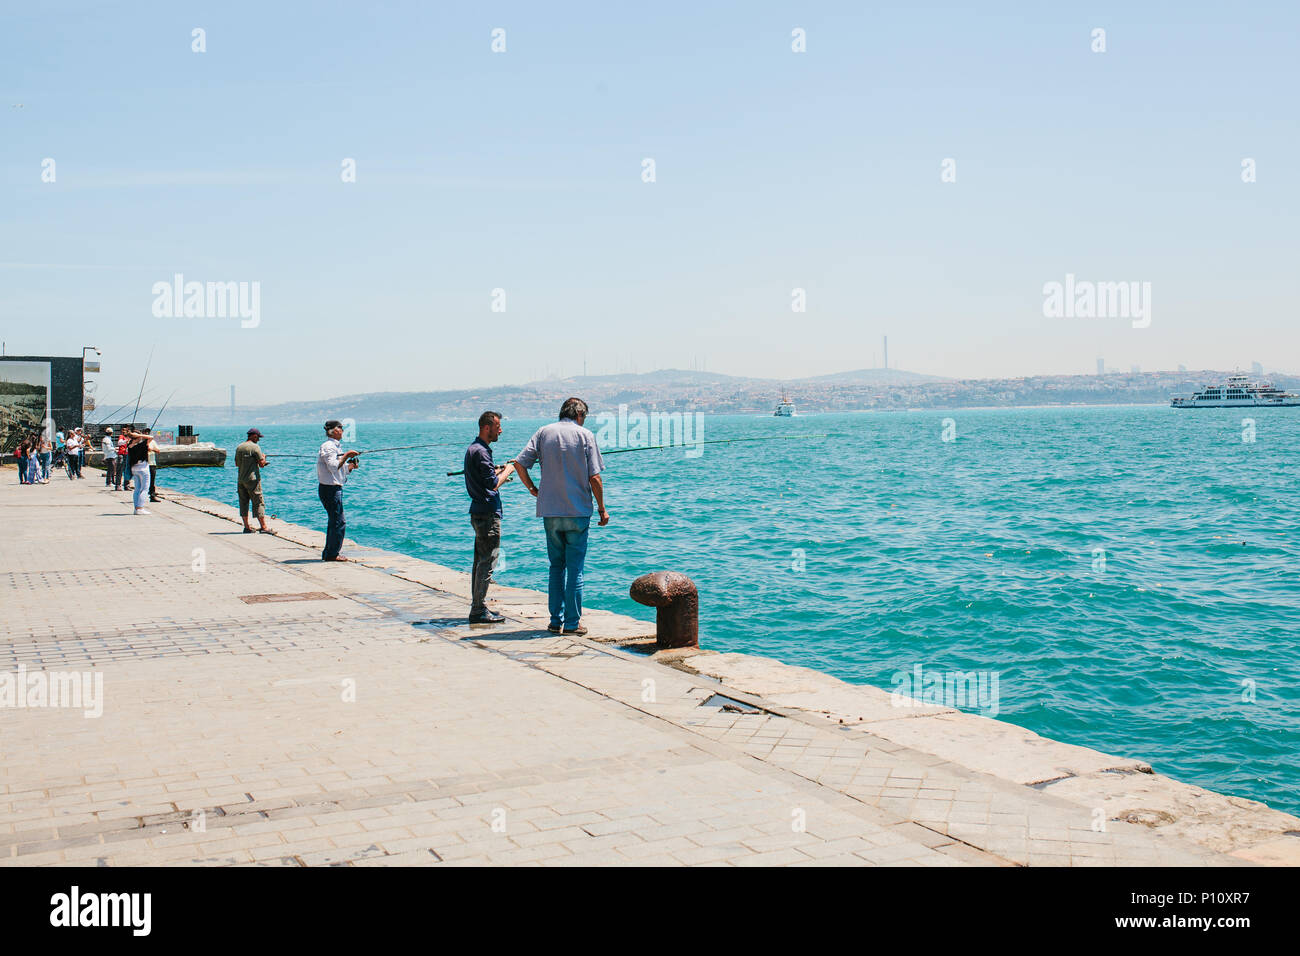 2 Guys talking on a wall waiting to cross the Bosphorus, Istanbul, Turkey